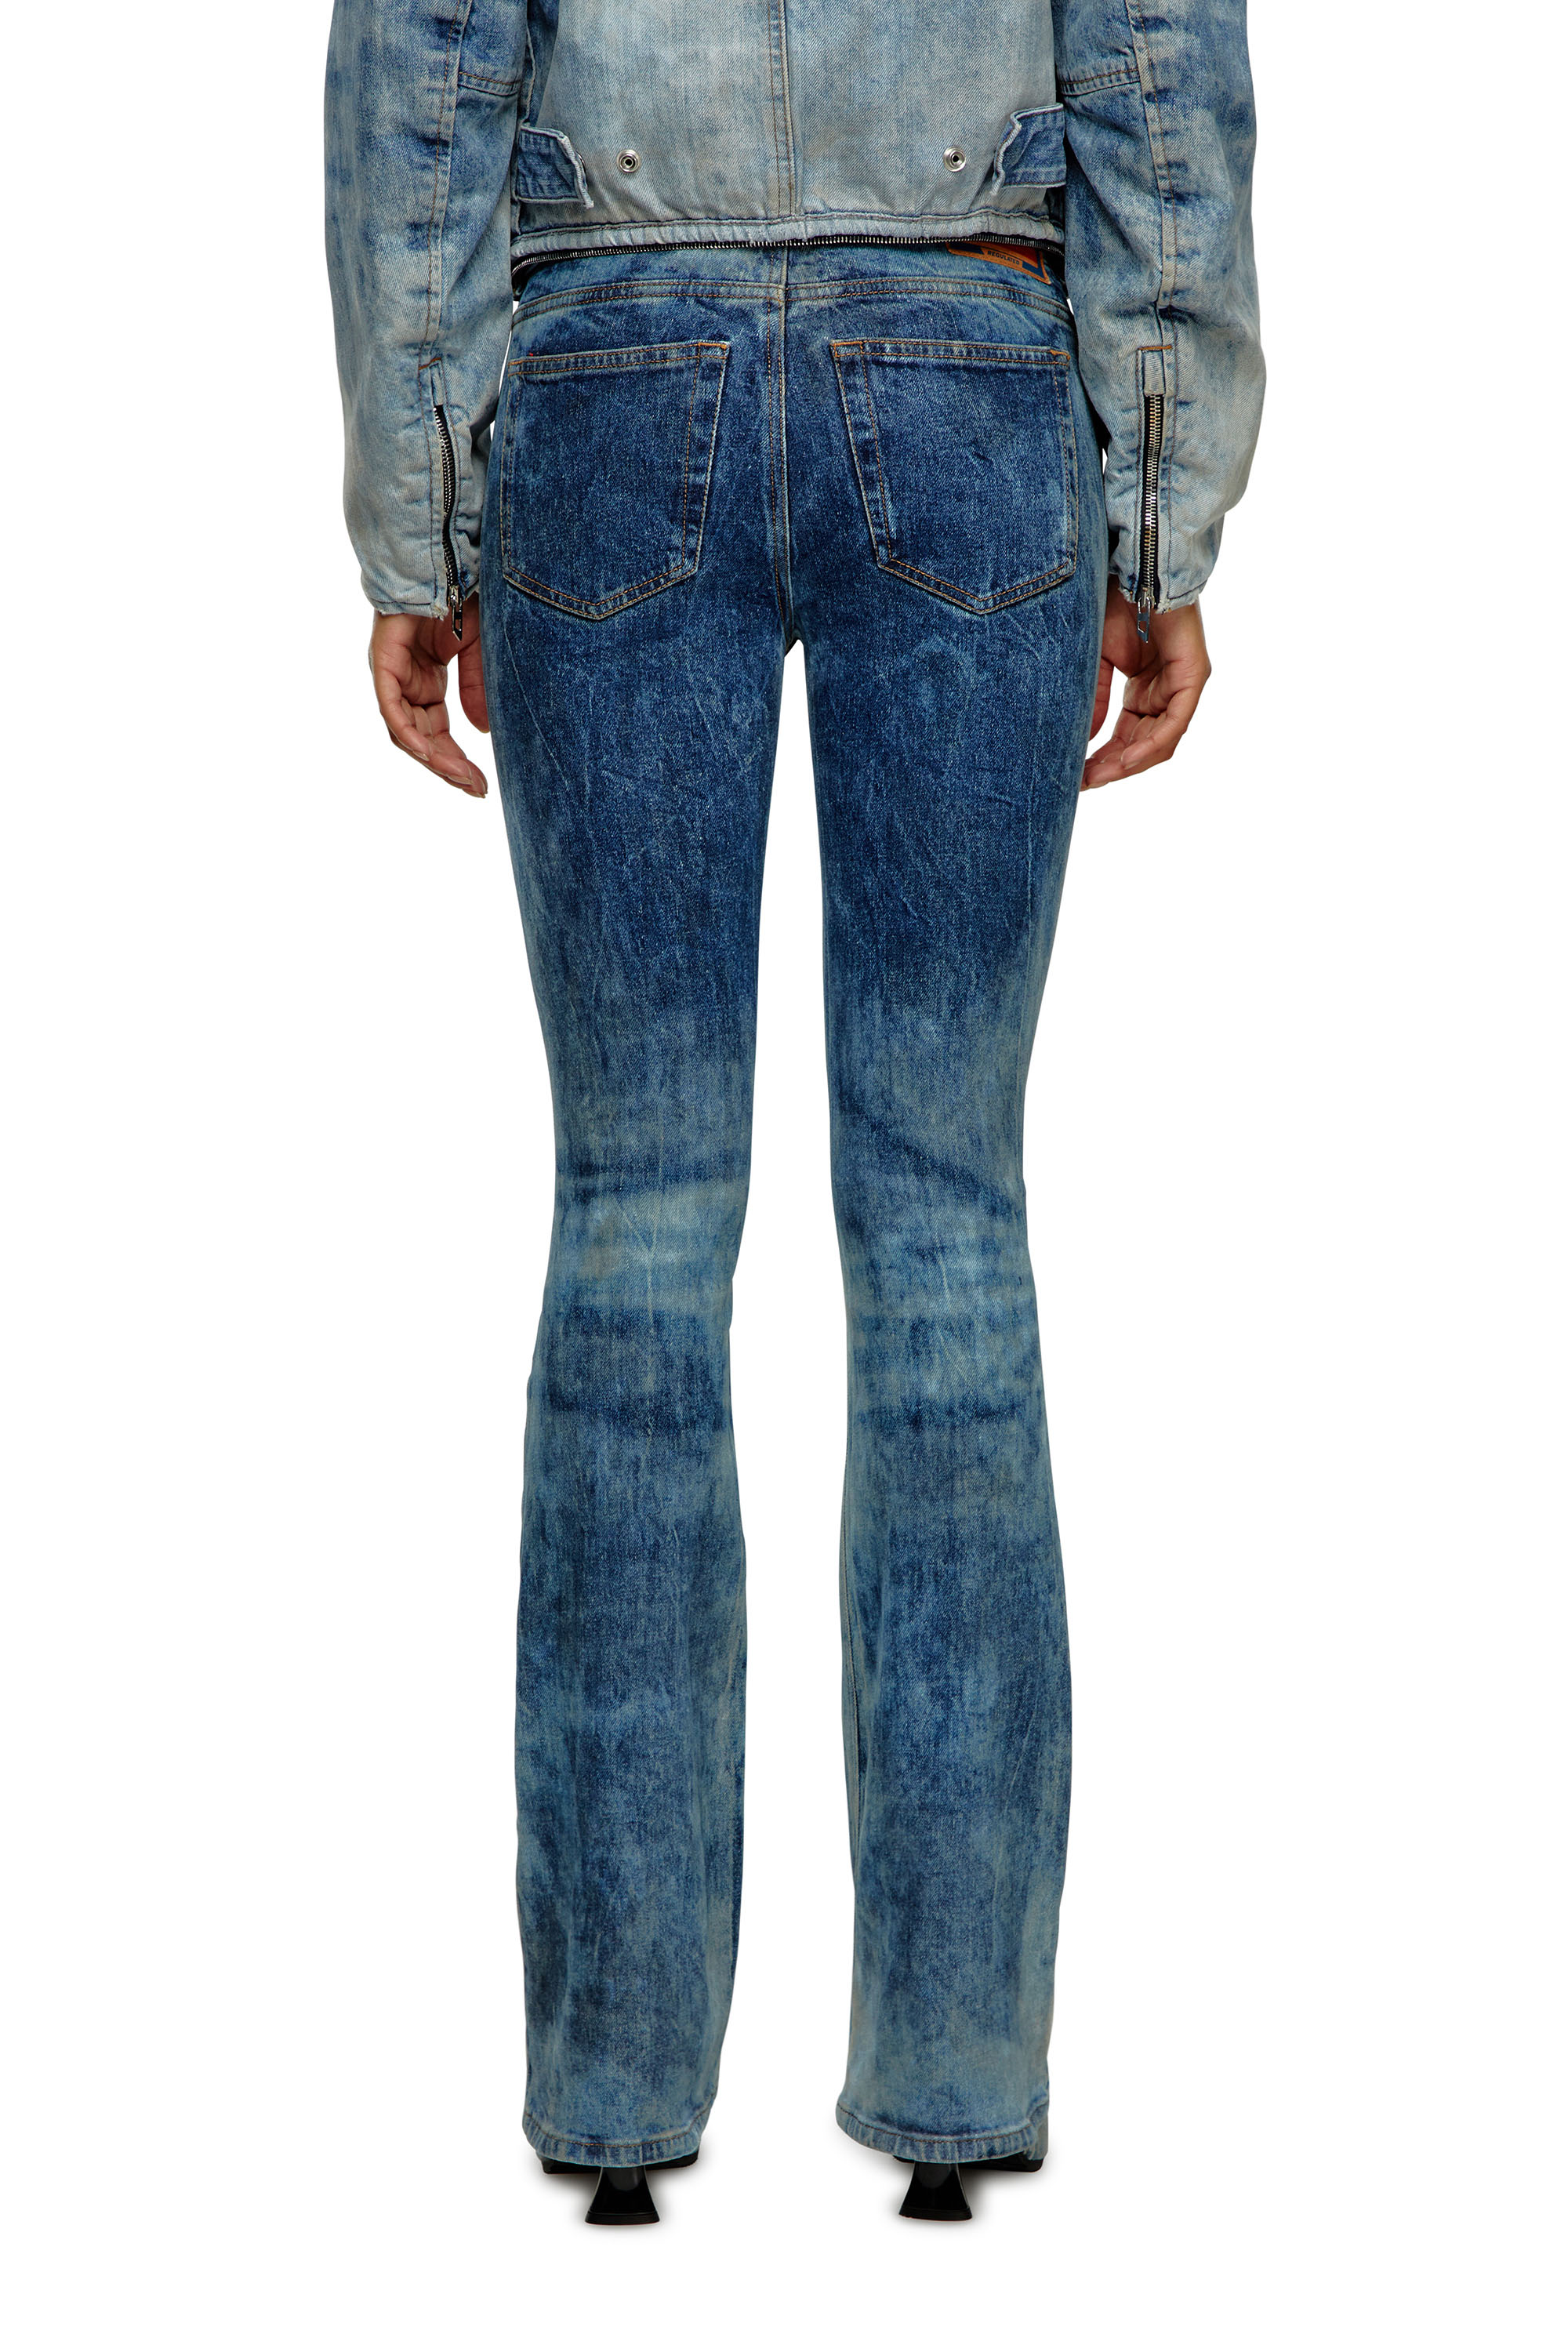 Diesel - Bootcut and Flare Jeans 1969 D-Ebbey 0PGAL, Mujer Bootcut y Flare Jeans - 1969 D-Ebbey in Azul marino - Image 3